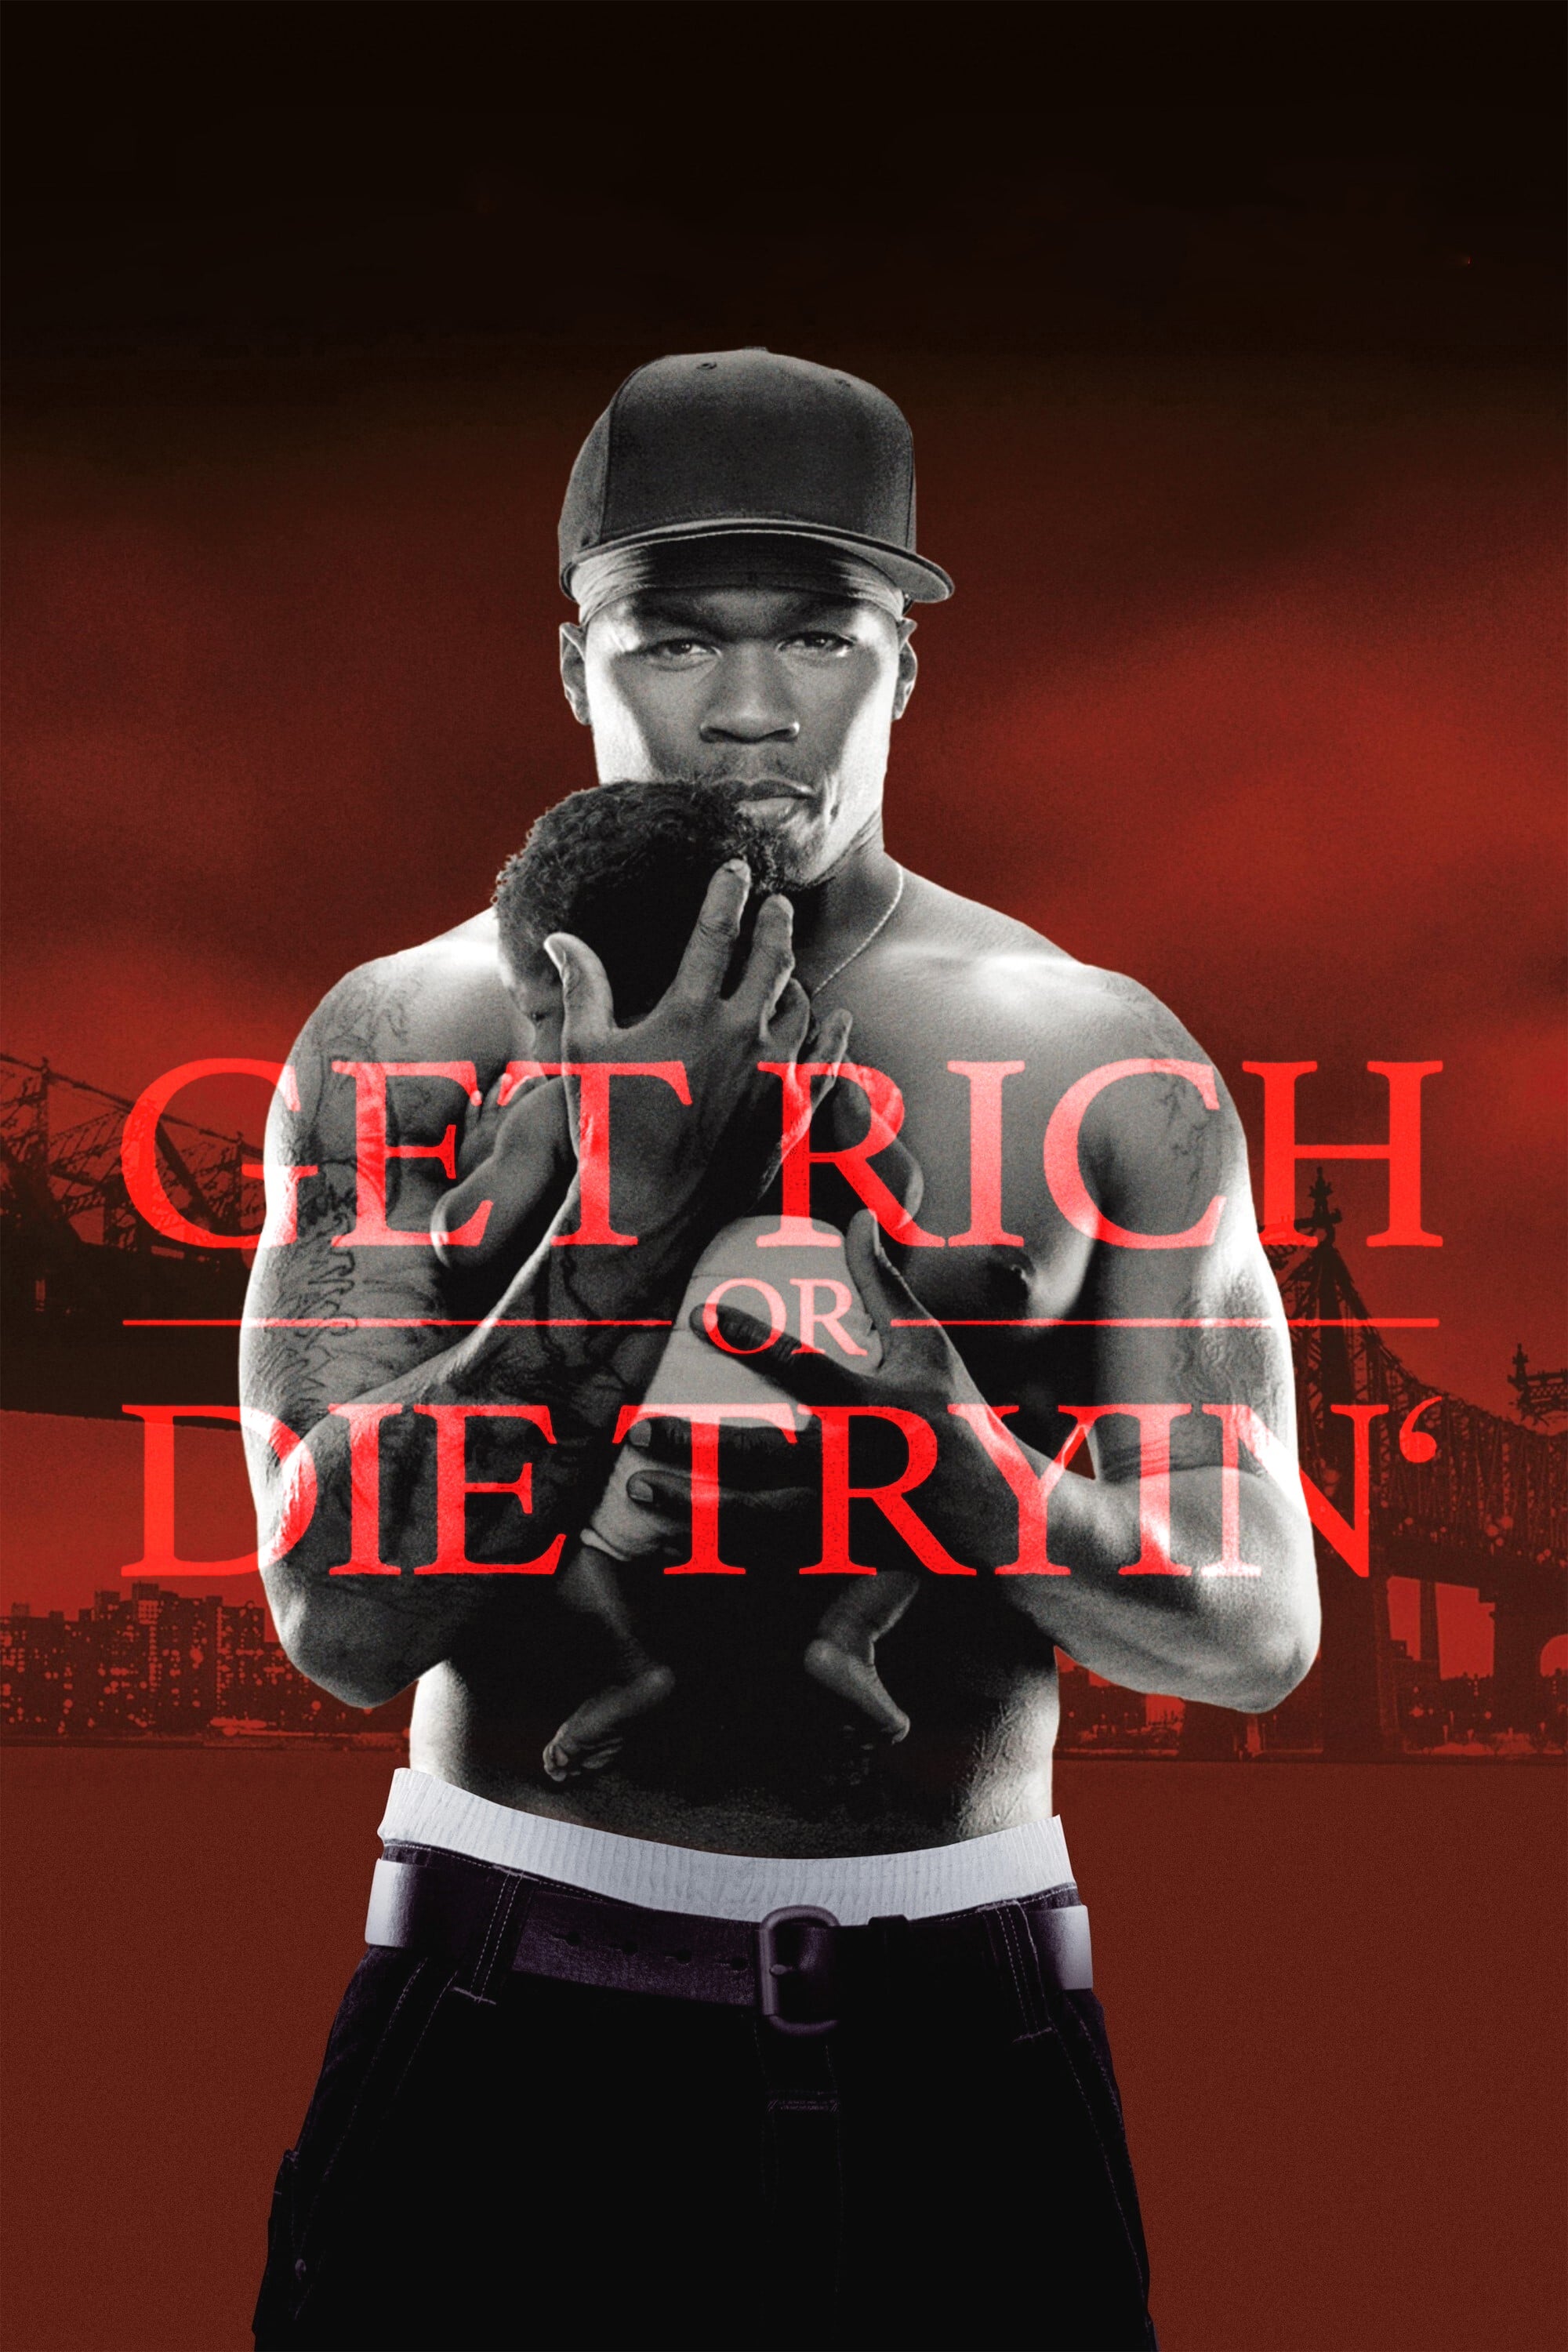 50 'Get Rich or Die Trying' Poster